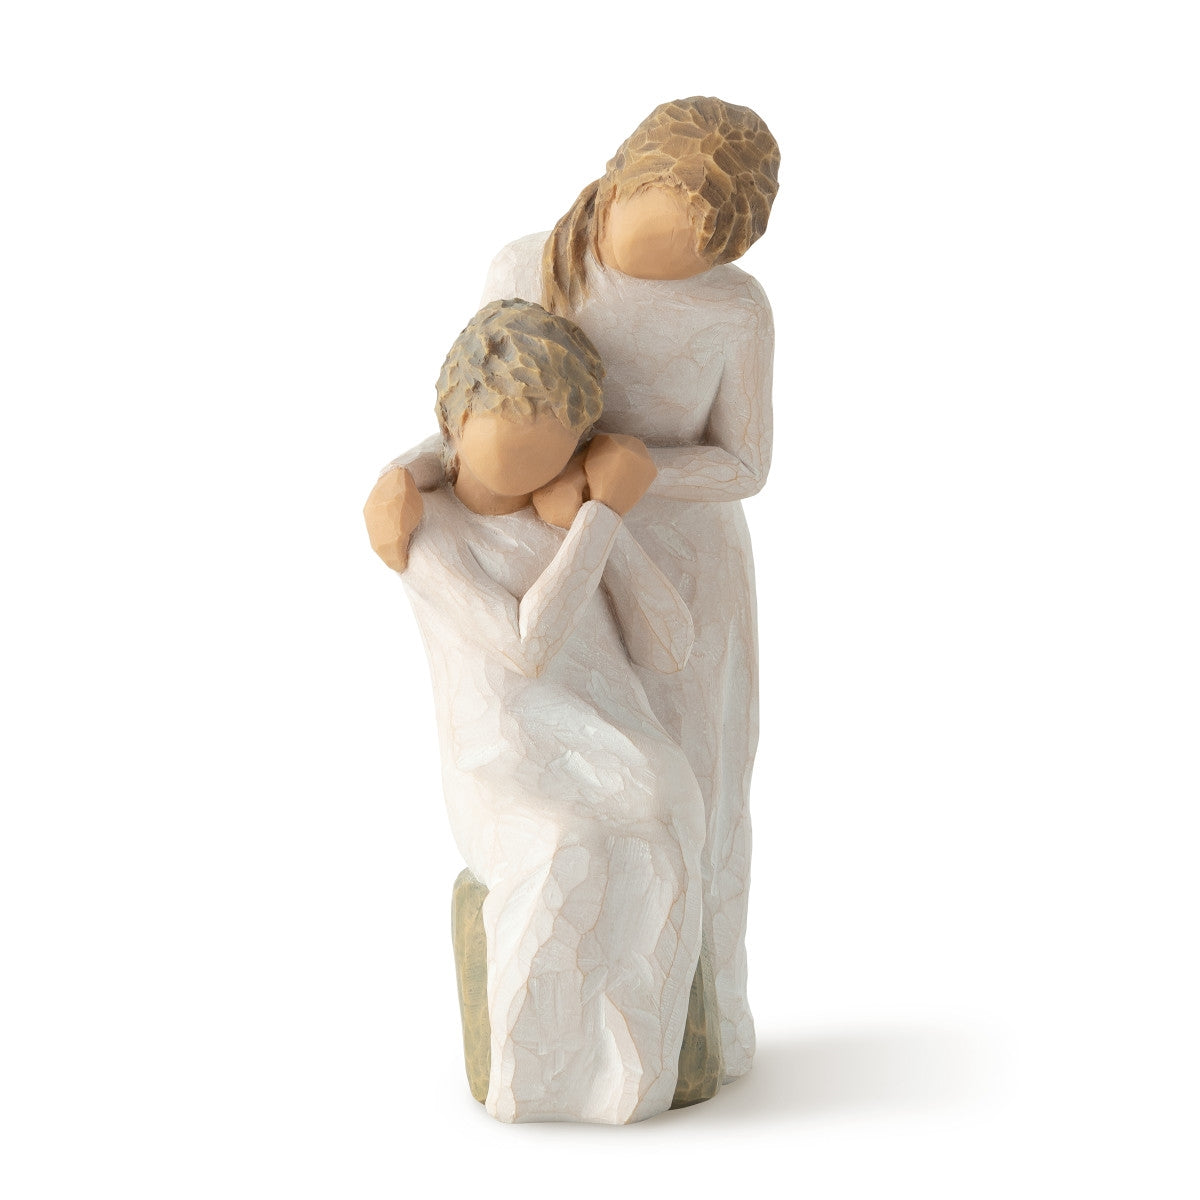 Loving My Mother Willow Tree® Figurine Sculpted by Susan Lordi